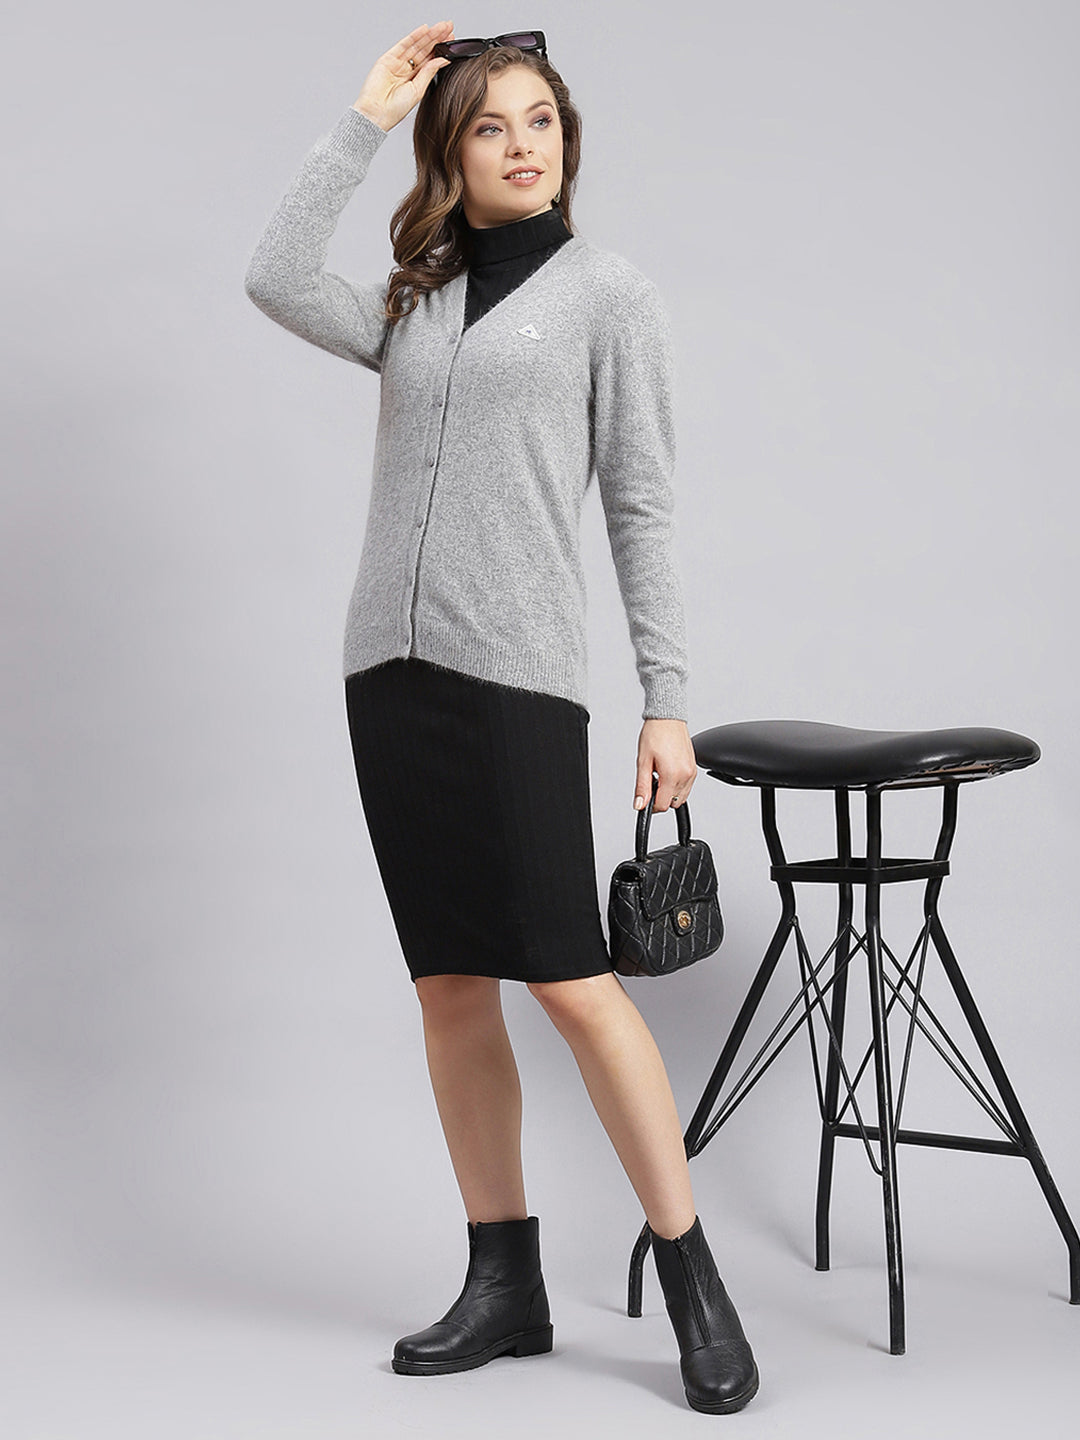 Grey Sweater Dresses - Buy Grey Sweater Dresses online in India